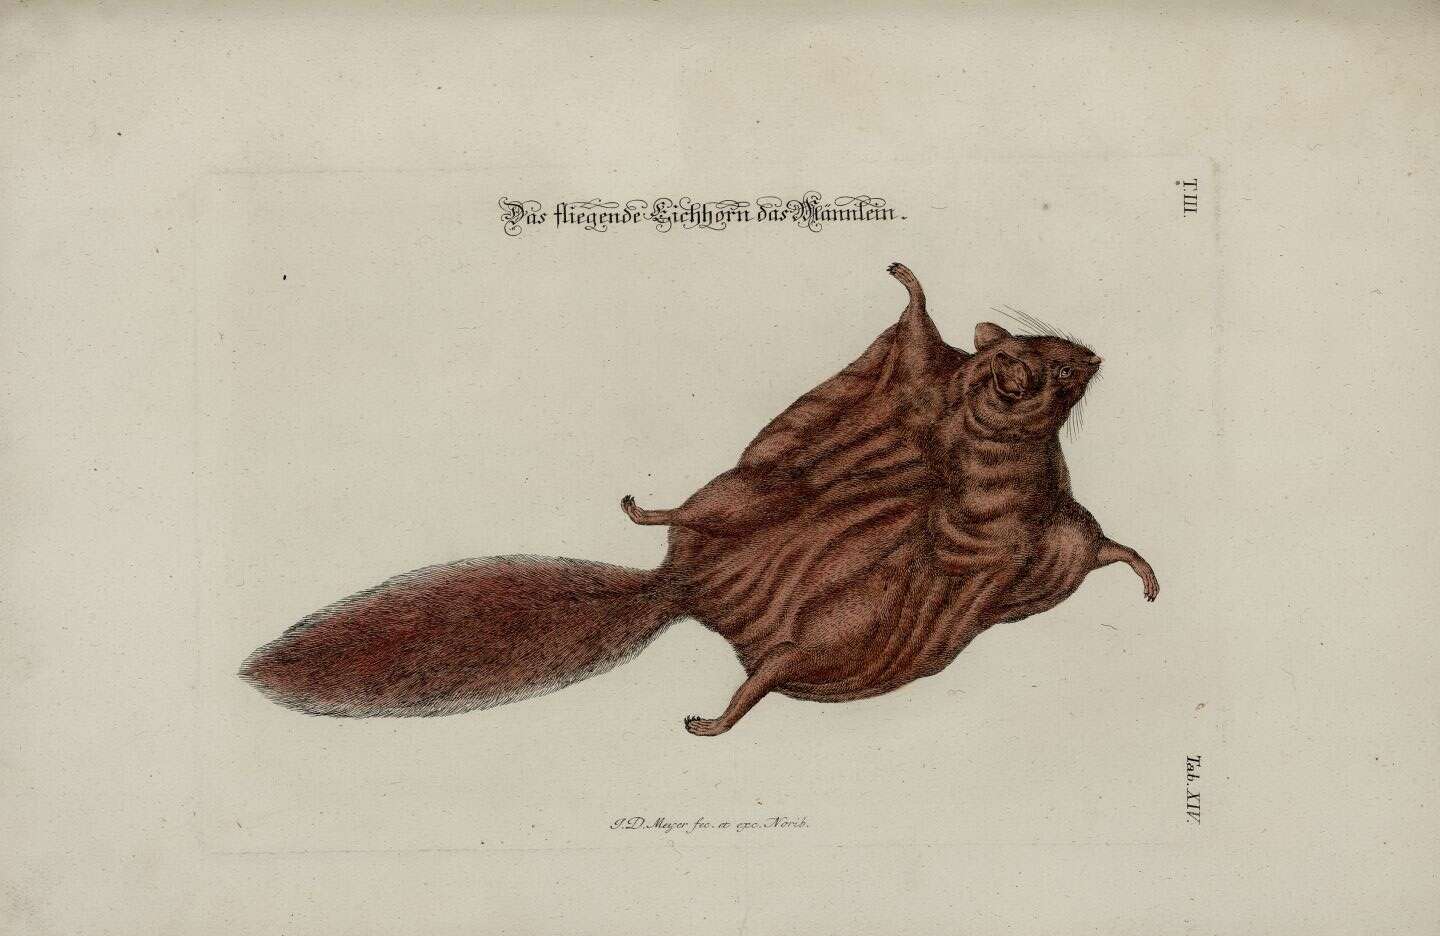 Image of Old World flying squirrel